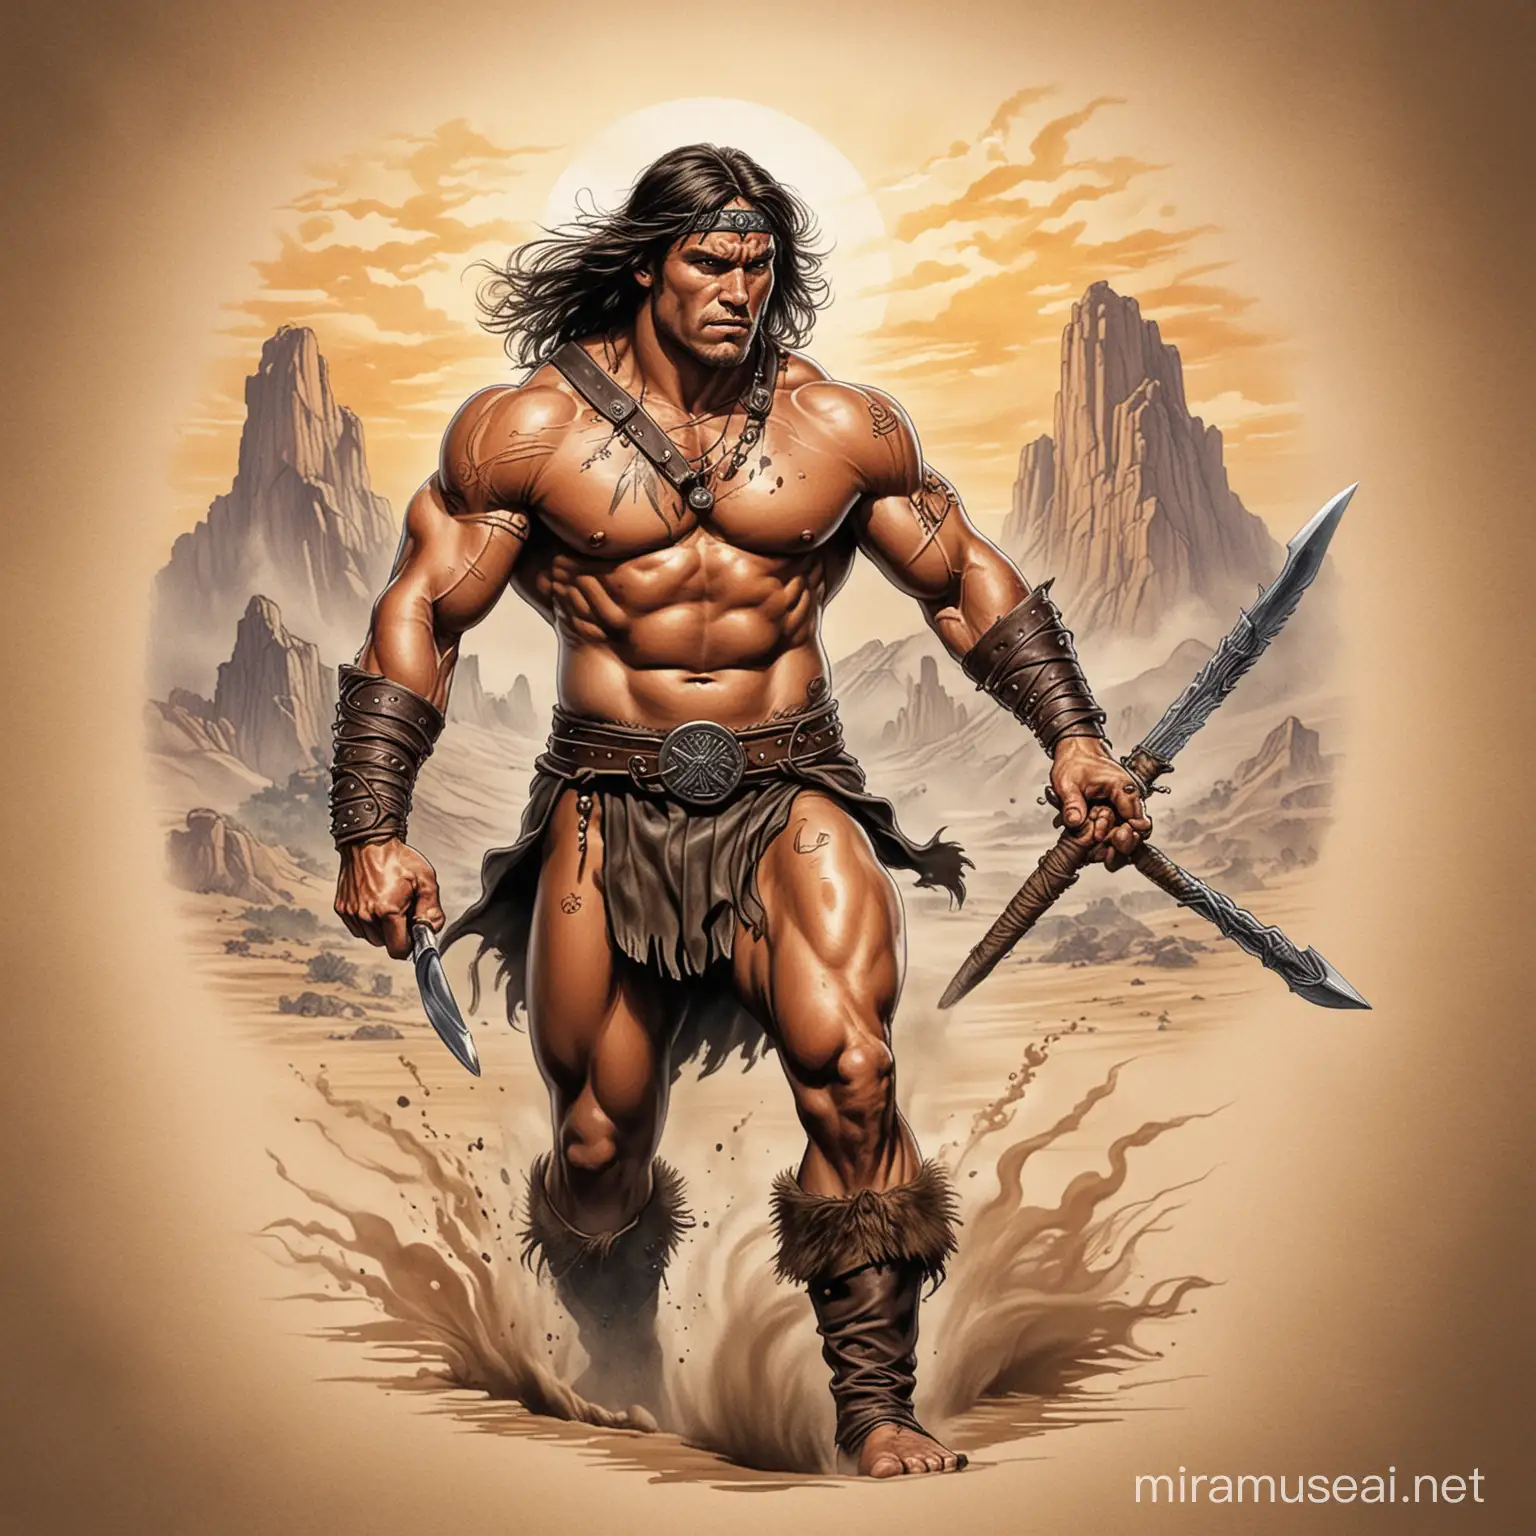 Conan the Barbarian walks against the wind, carrying a club, color tattoo art, Alfredo Alcala style